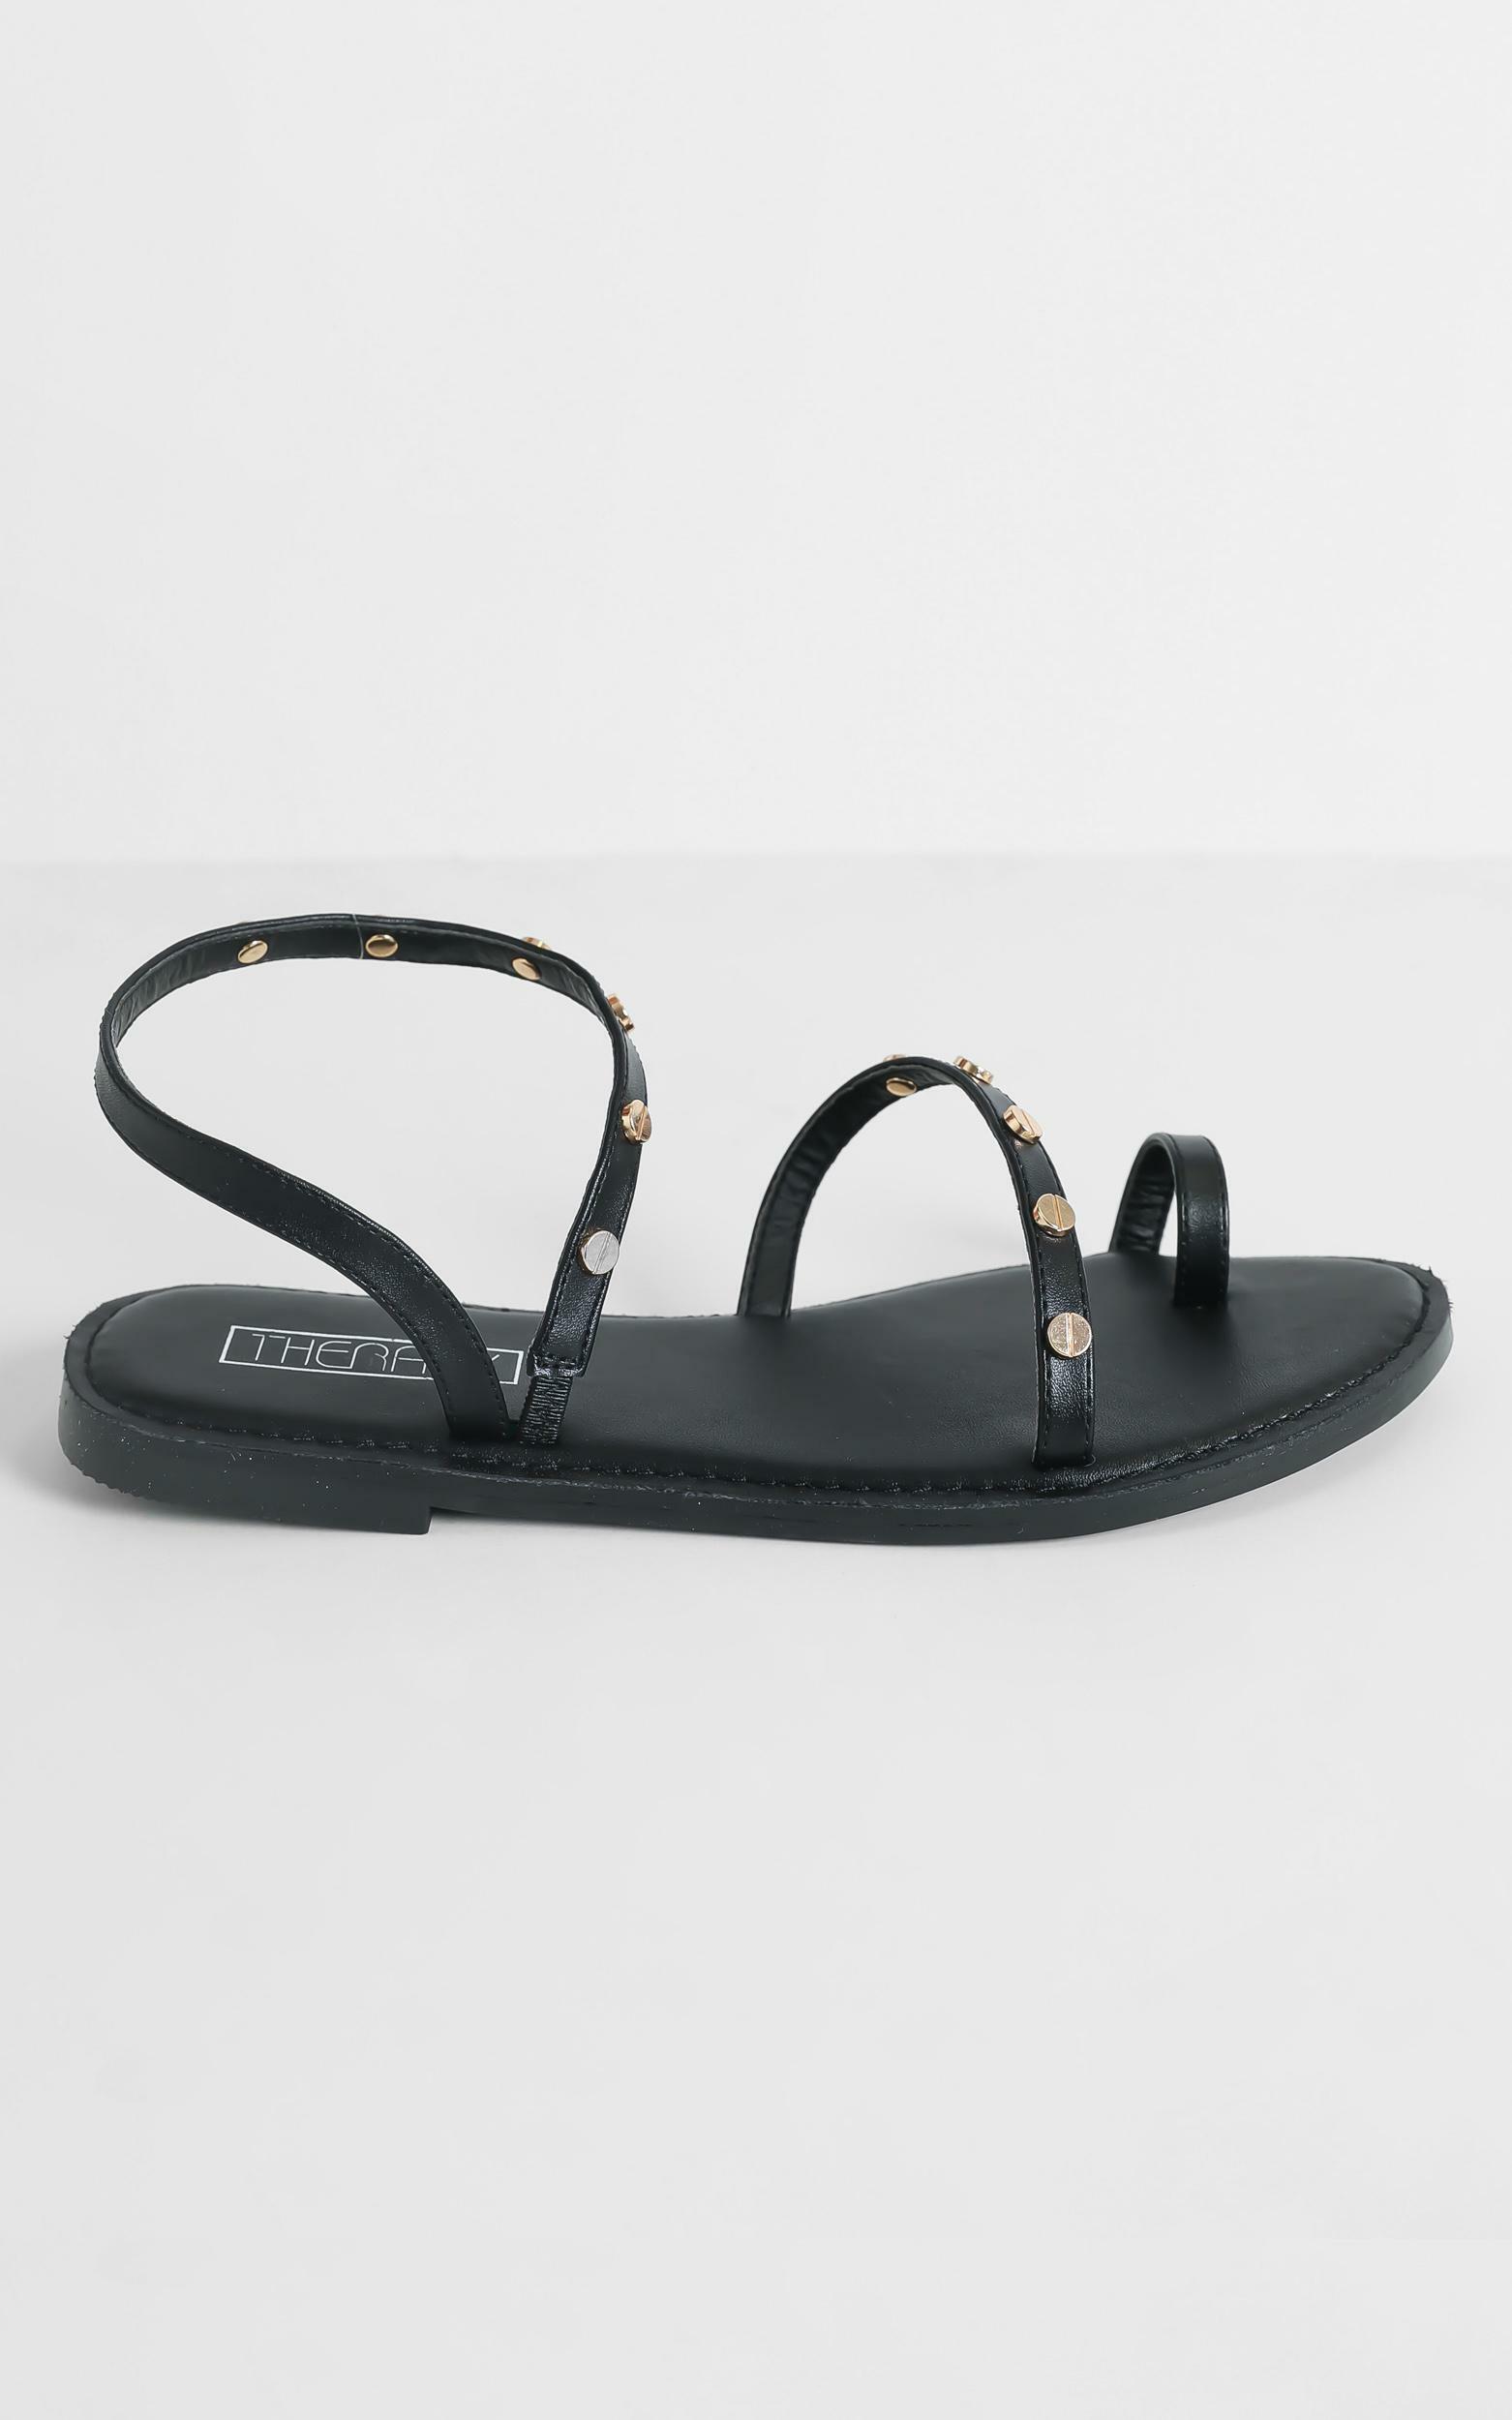 Therapy - Nastassia Sandals in Black - 10, BLK1, hi-res image number null